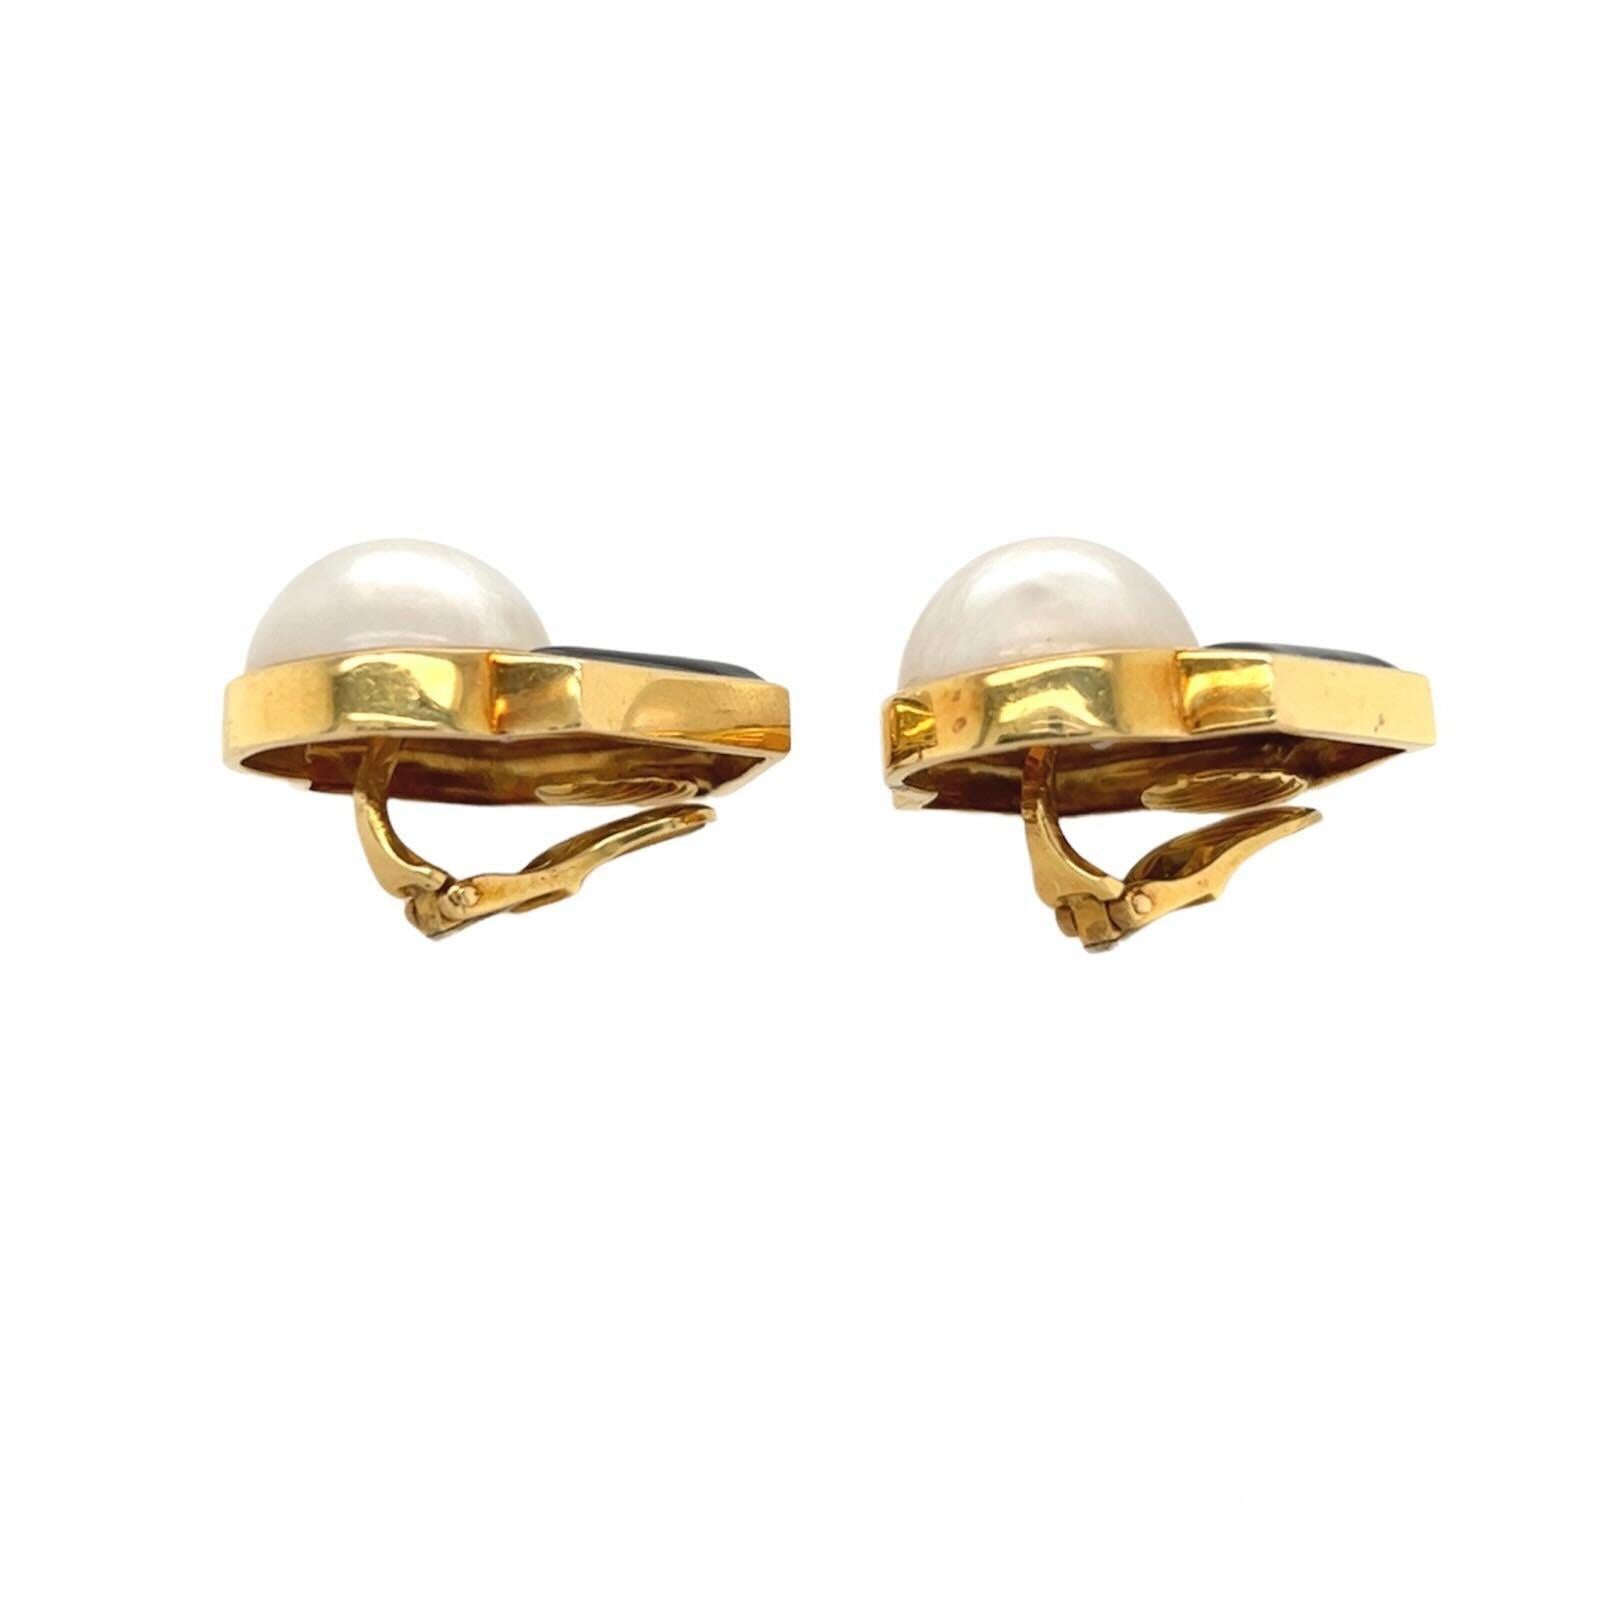 A pair of 18 karat yellow gold, mabe pearl, diamond and enamel earclips. Andrew Clunn.  Designed as geometric plaques centering a mabe pearl surmounted by pave diamonds in a black enamel frame.  Nineteen diamonds in each earring total thirty eight